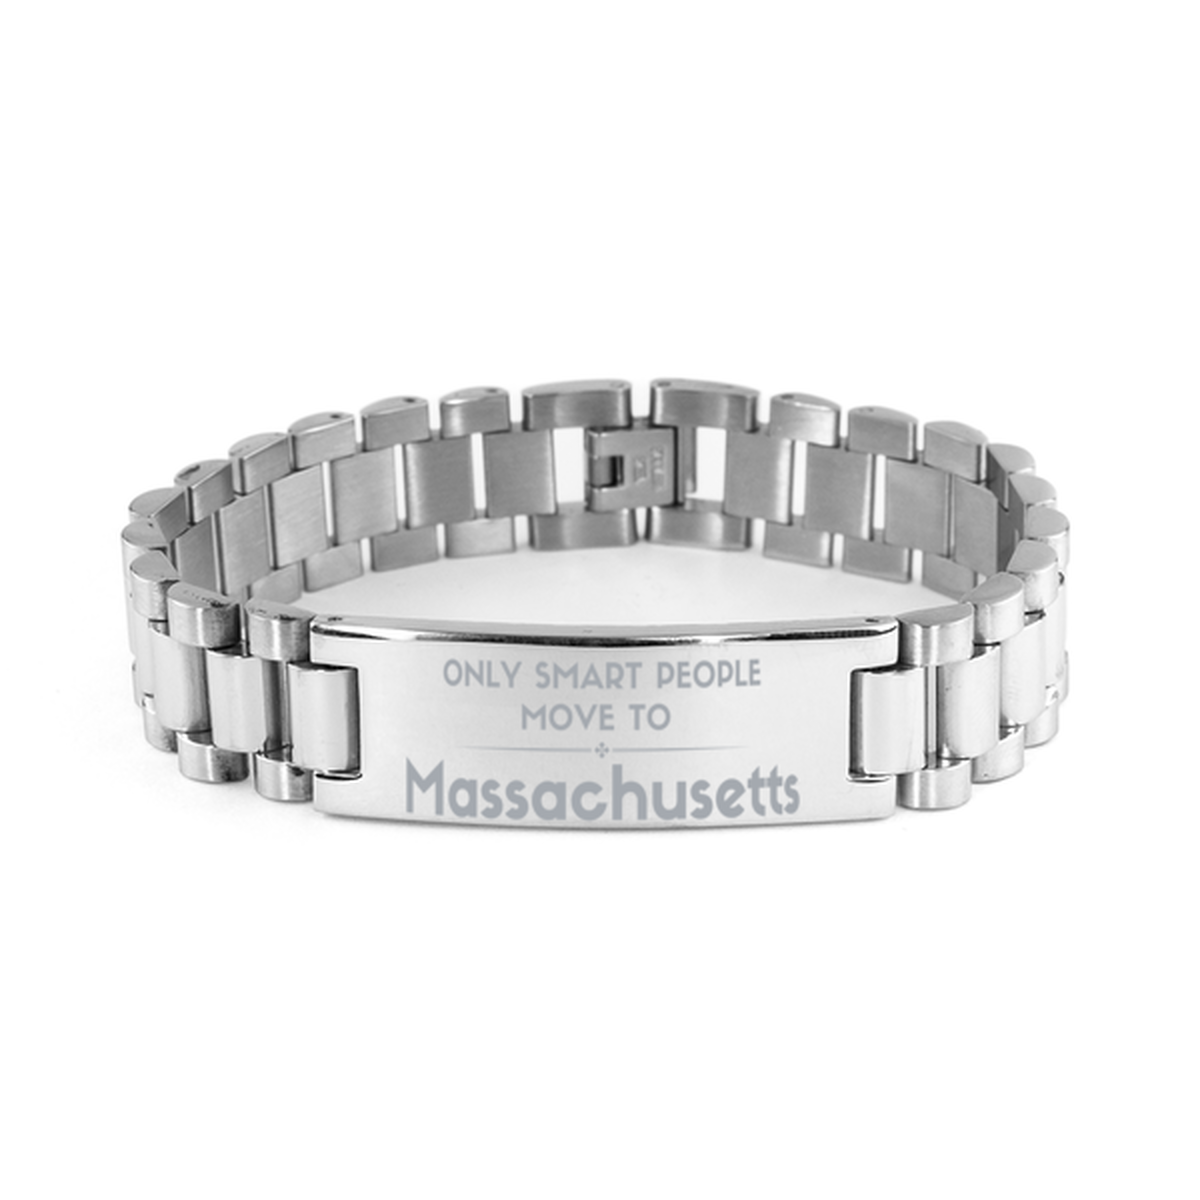 Only smart people move to Massachusetts Ladder Stainless Steel Bracelet, Gag Gifts For Massachusetts, Move to Massachusetts Gifts for Friends Coworker Funny Saying Quote